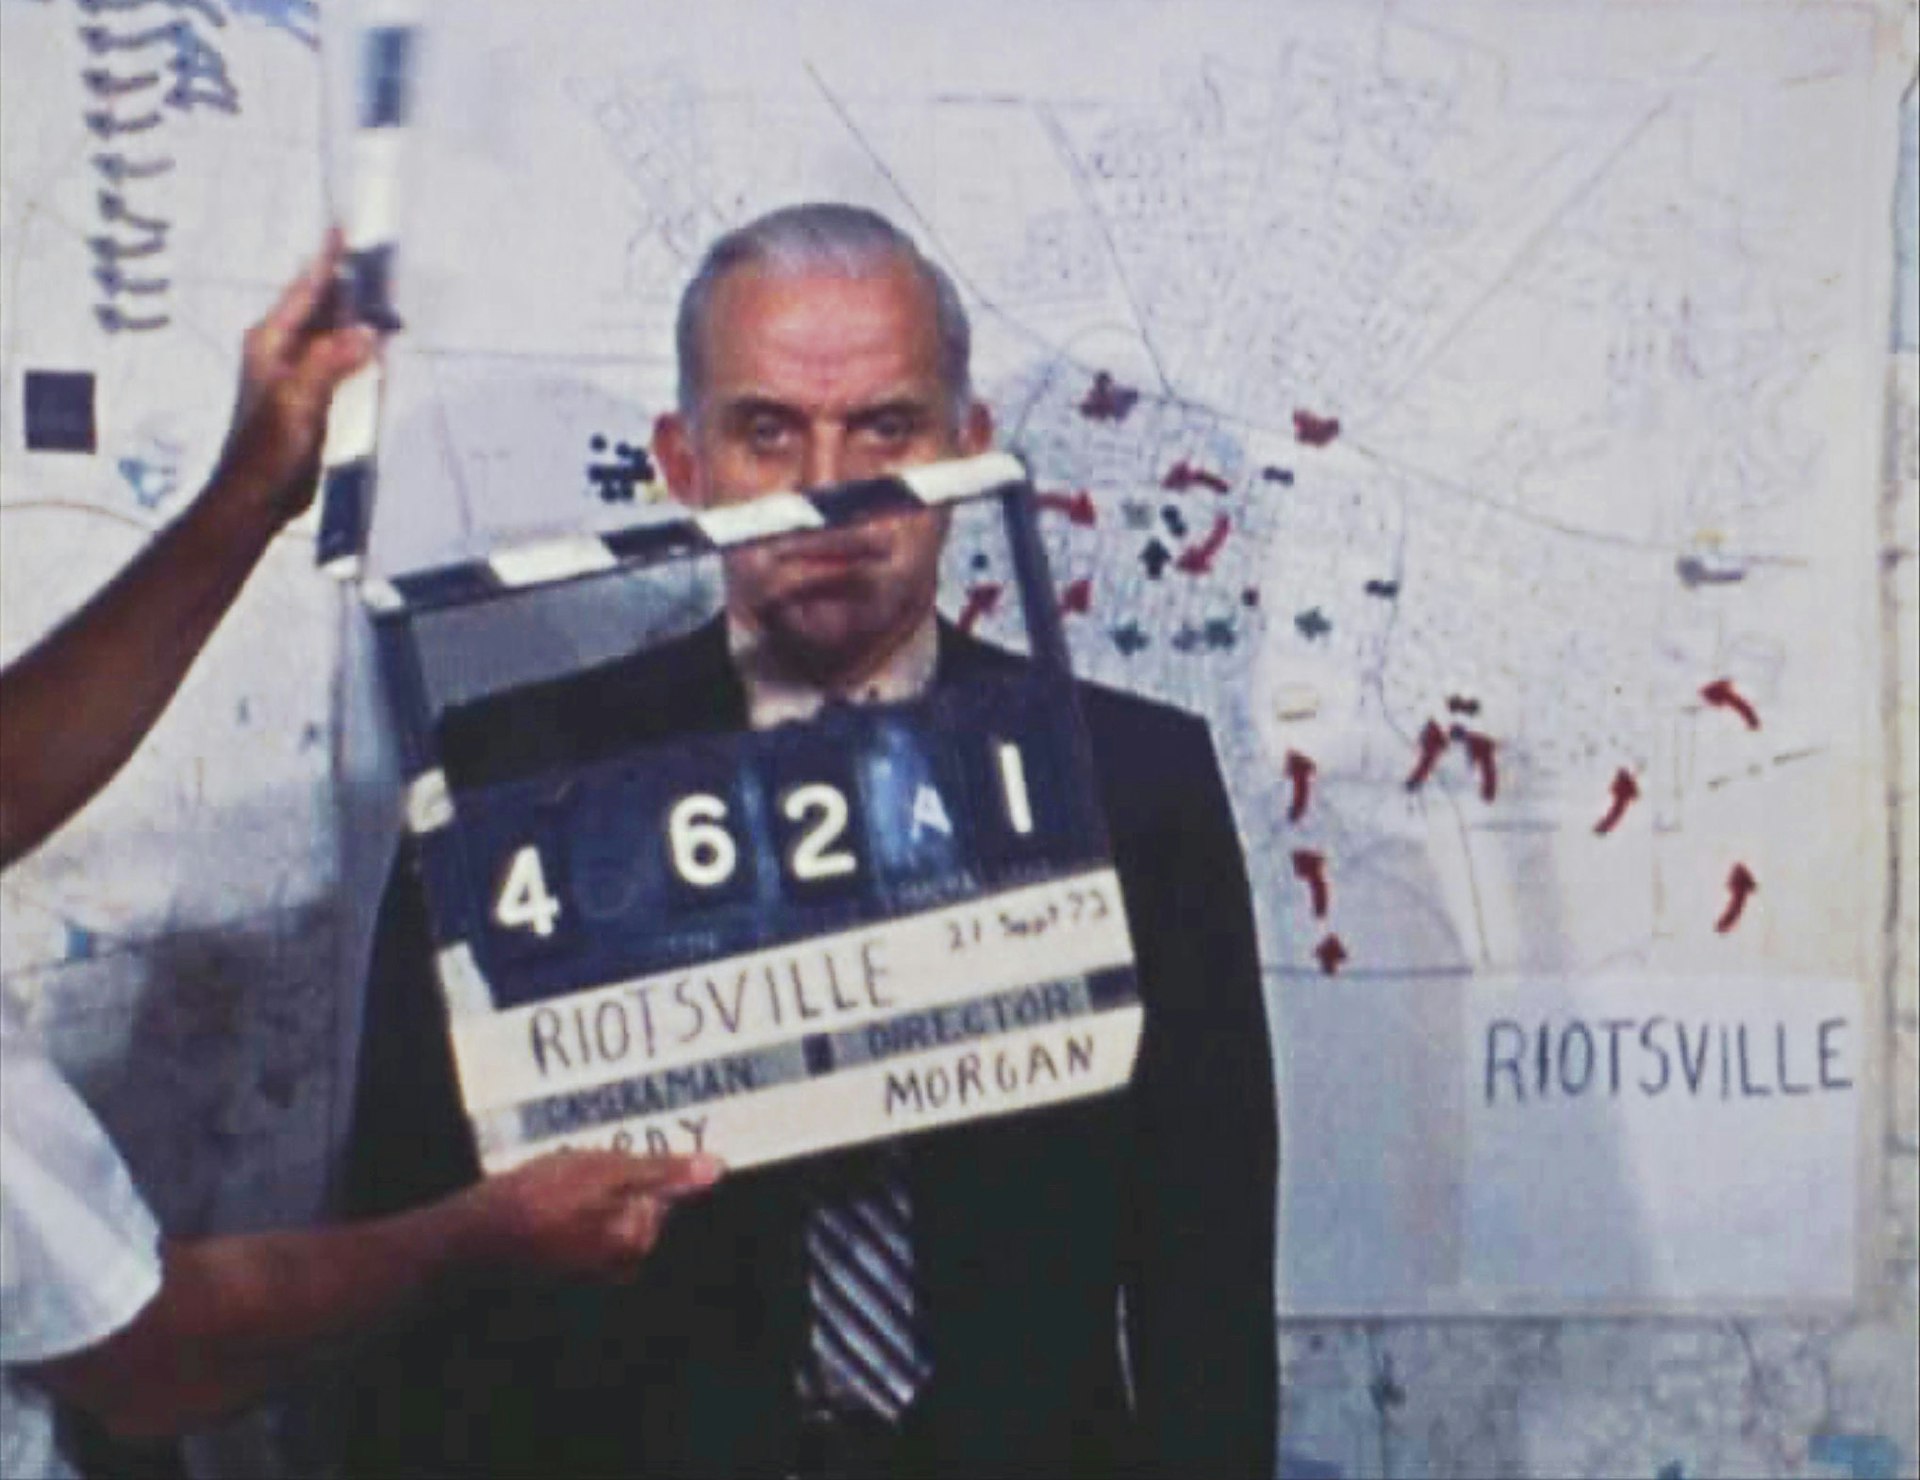 The film exposing decades of police brutality